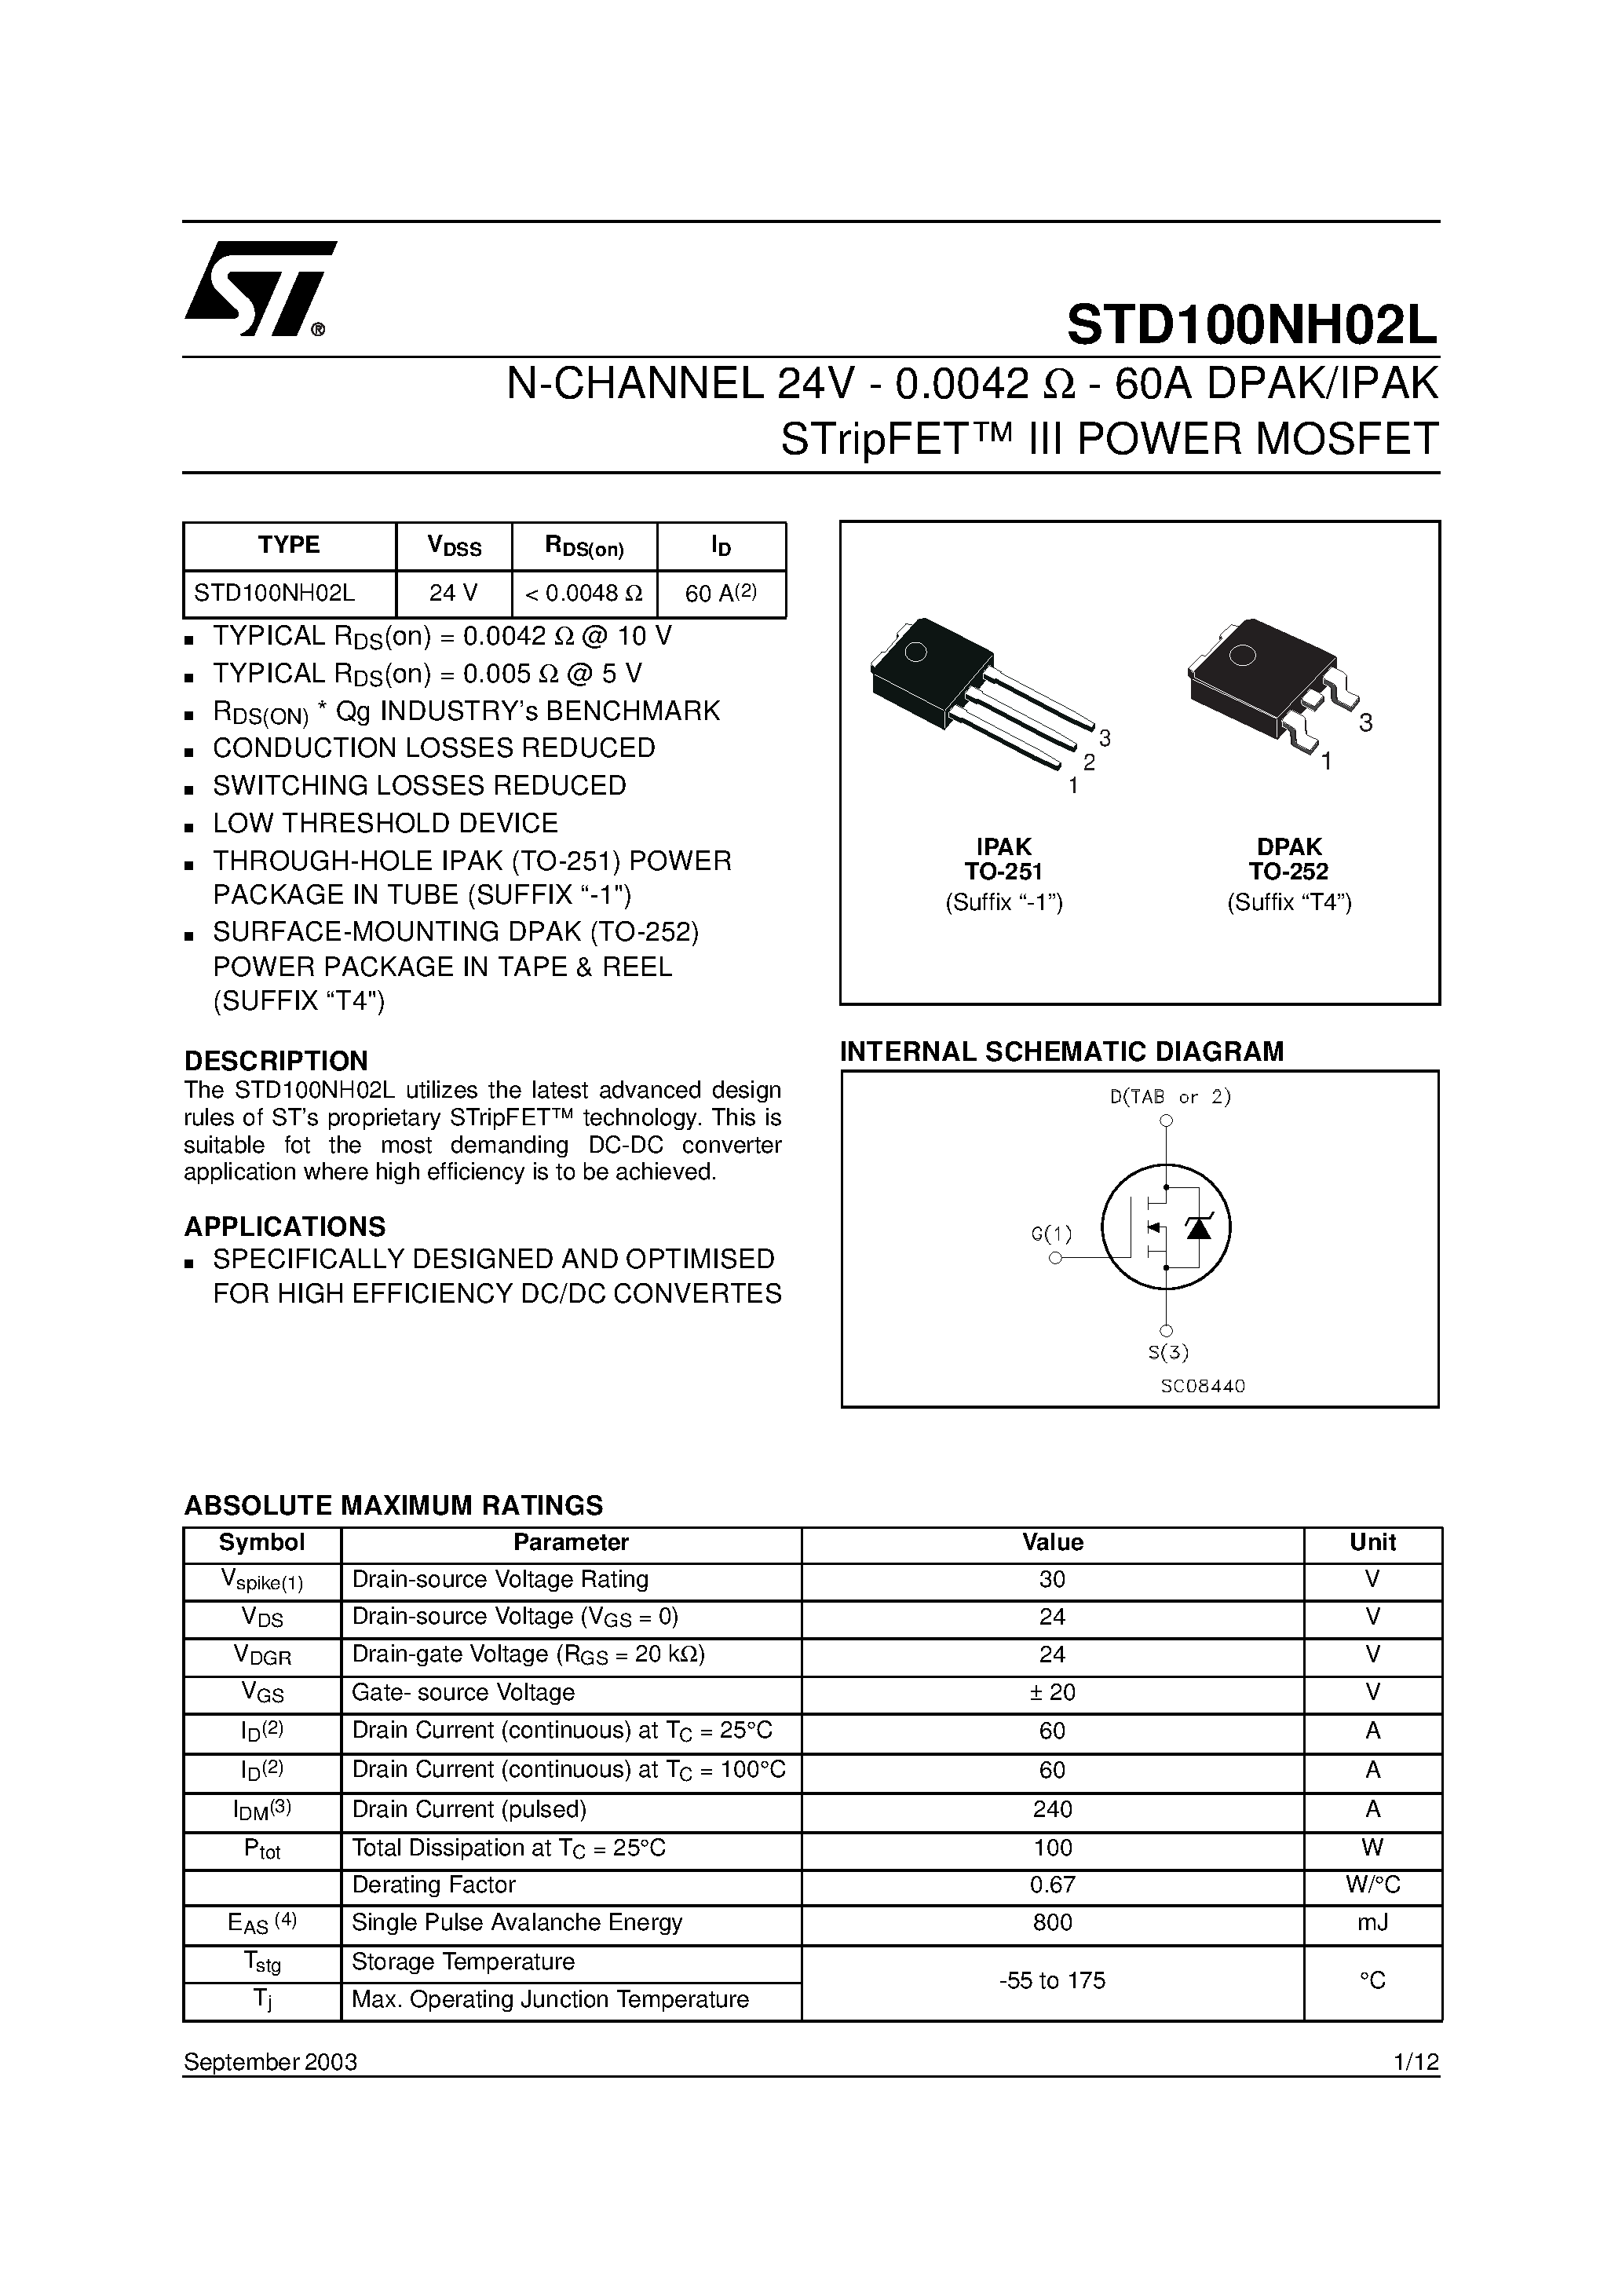 Datasheet STD100NH02L - N-CHANNEL POWER MOSFET page 1